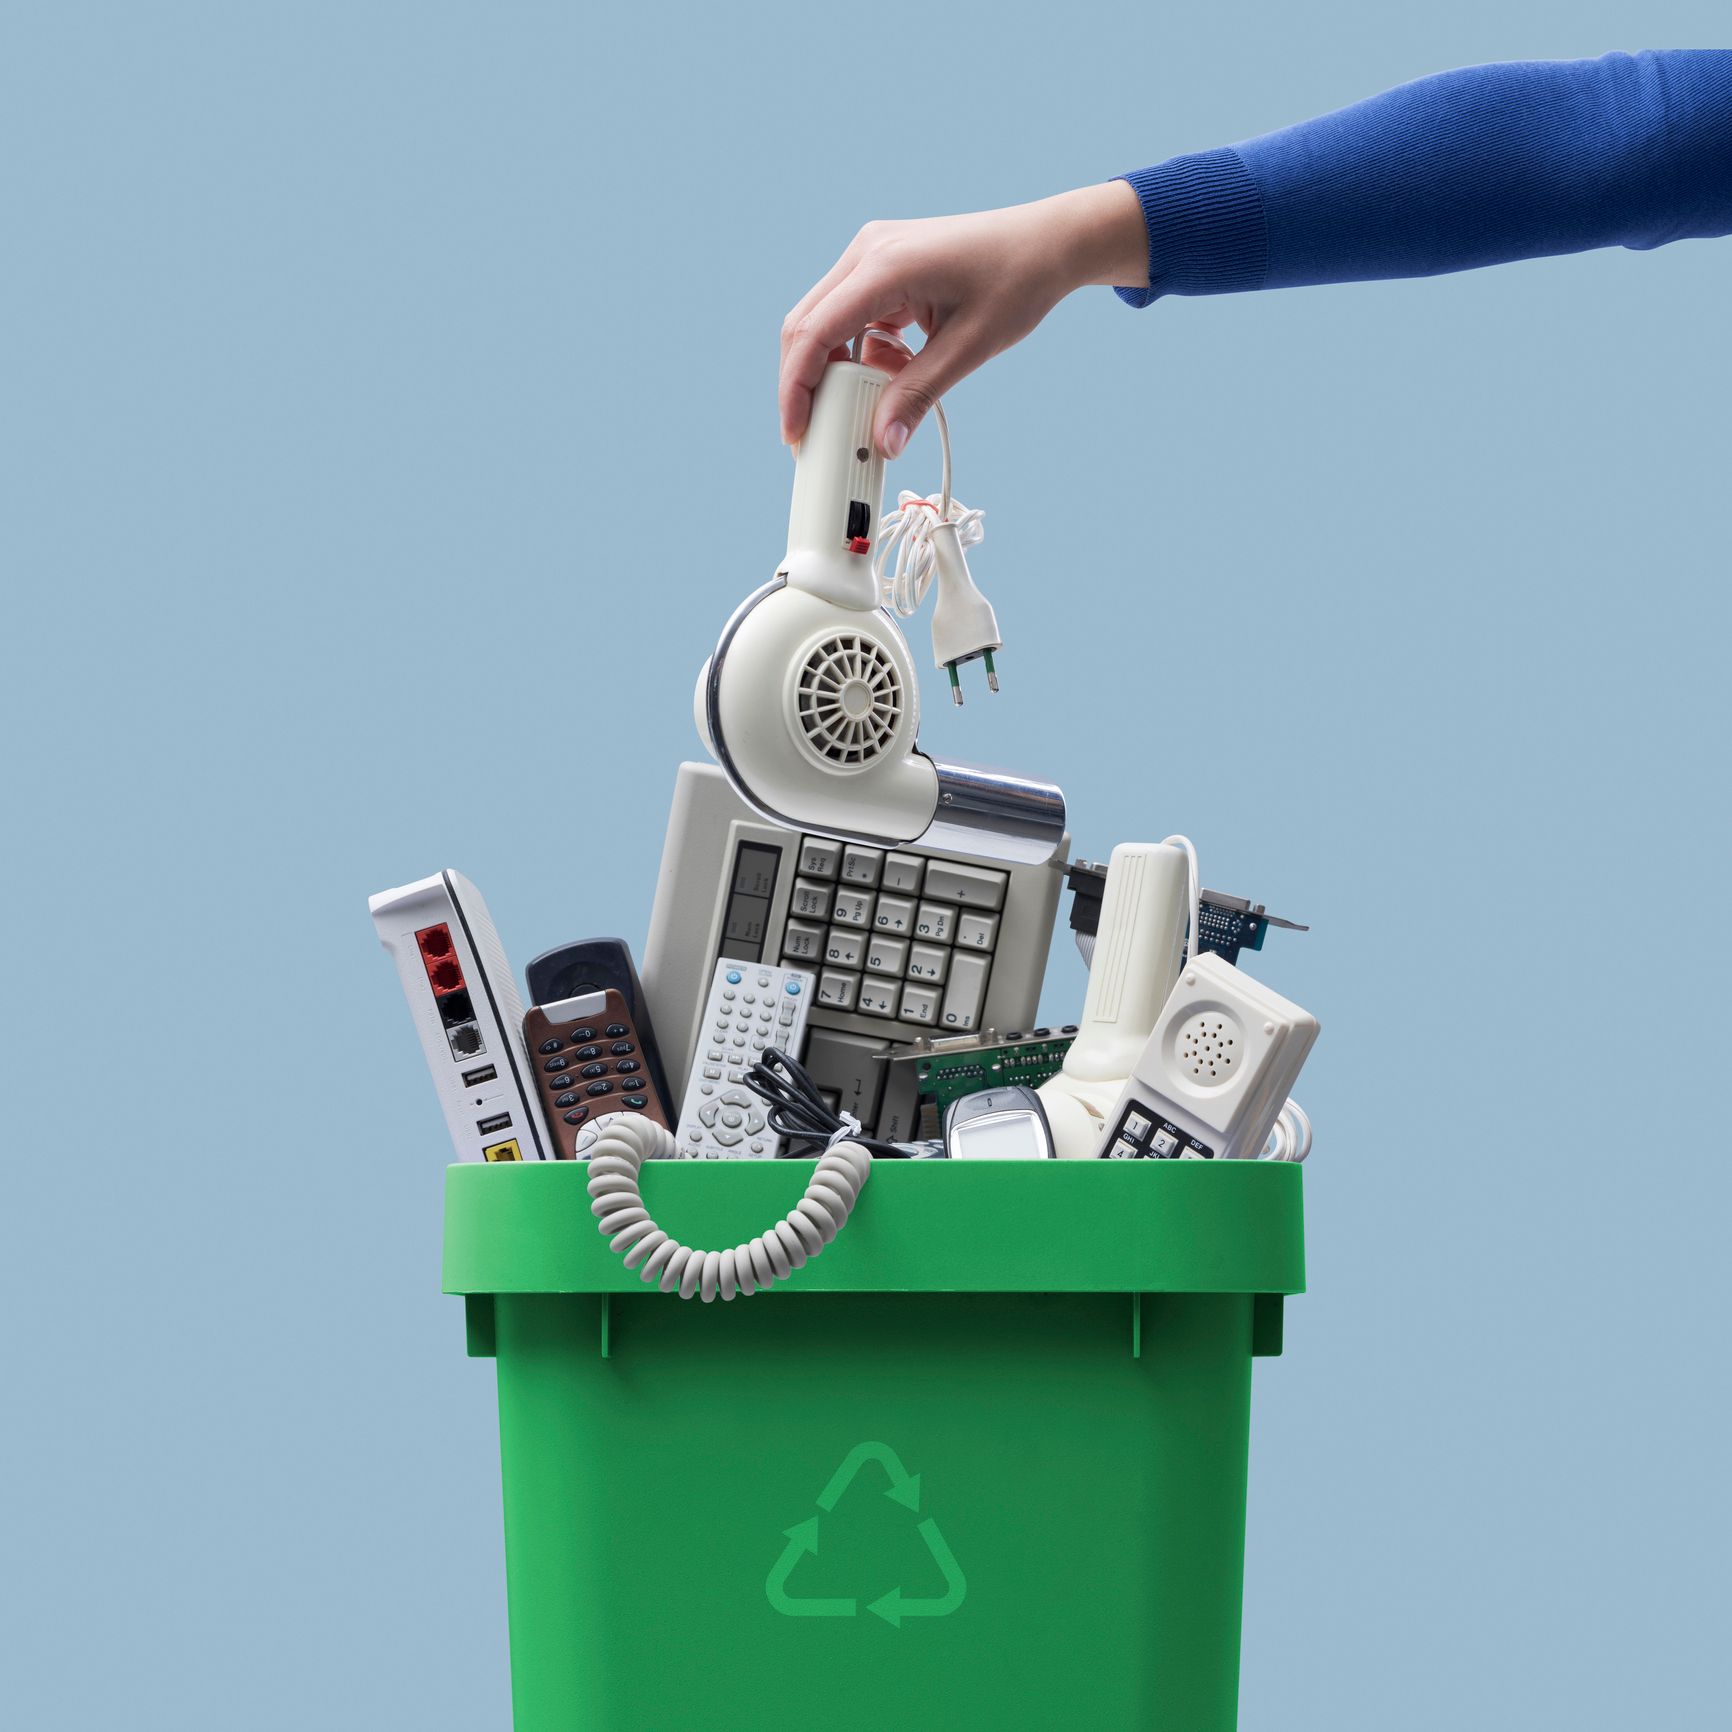 A Tower of Cable Waste, How E-Waste Can Affect The Environment 